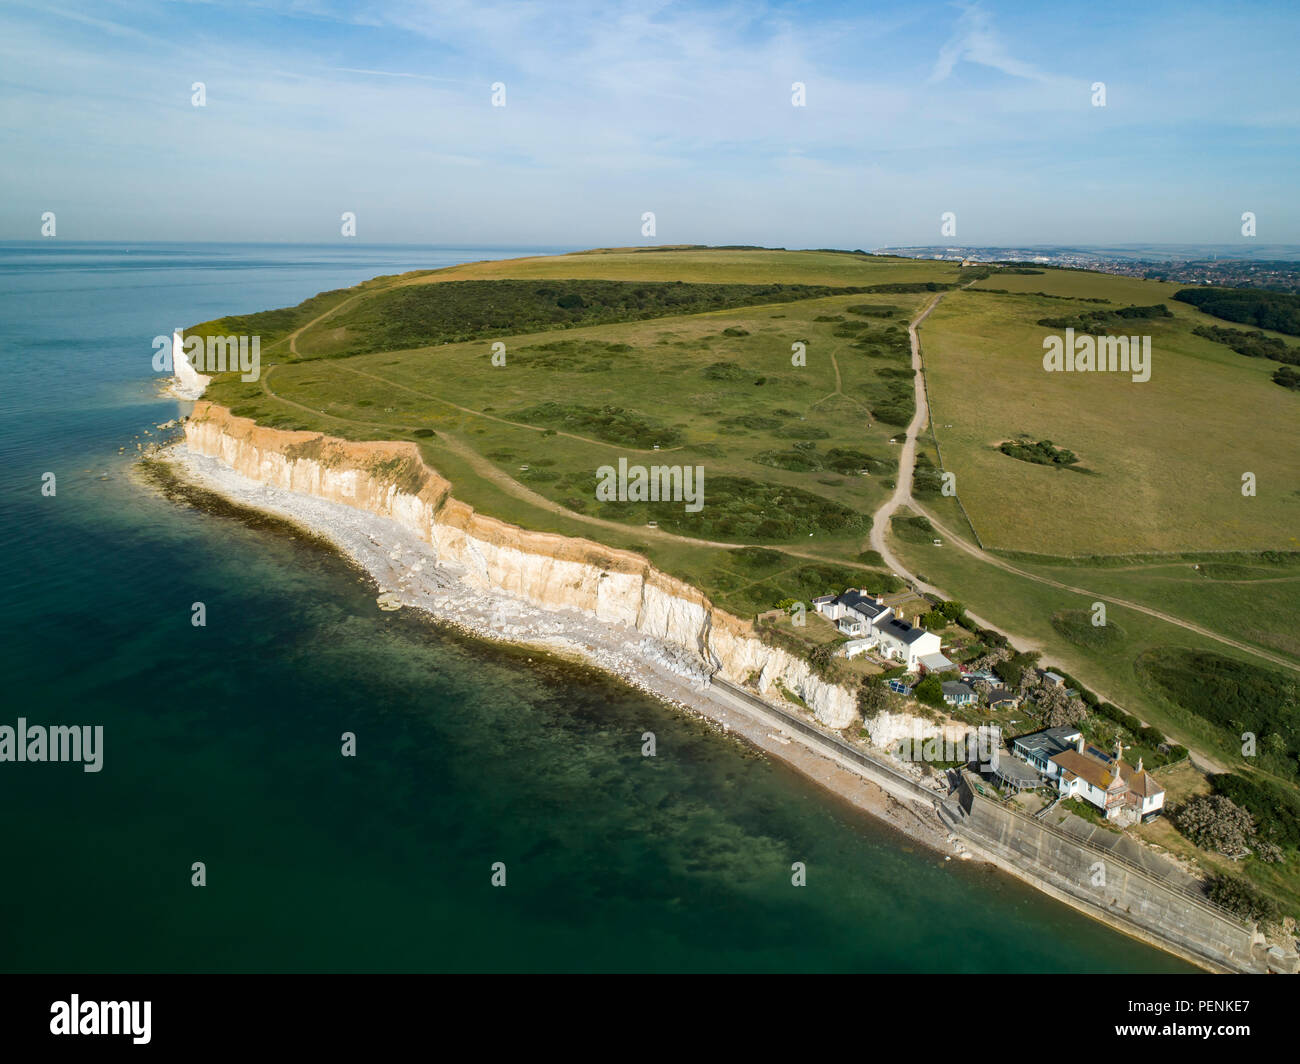 Drone image of Cuckmere Haven with coastguard cottages Seaford Head. Sussex, England Stock Photo